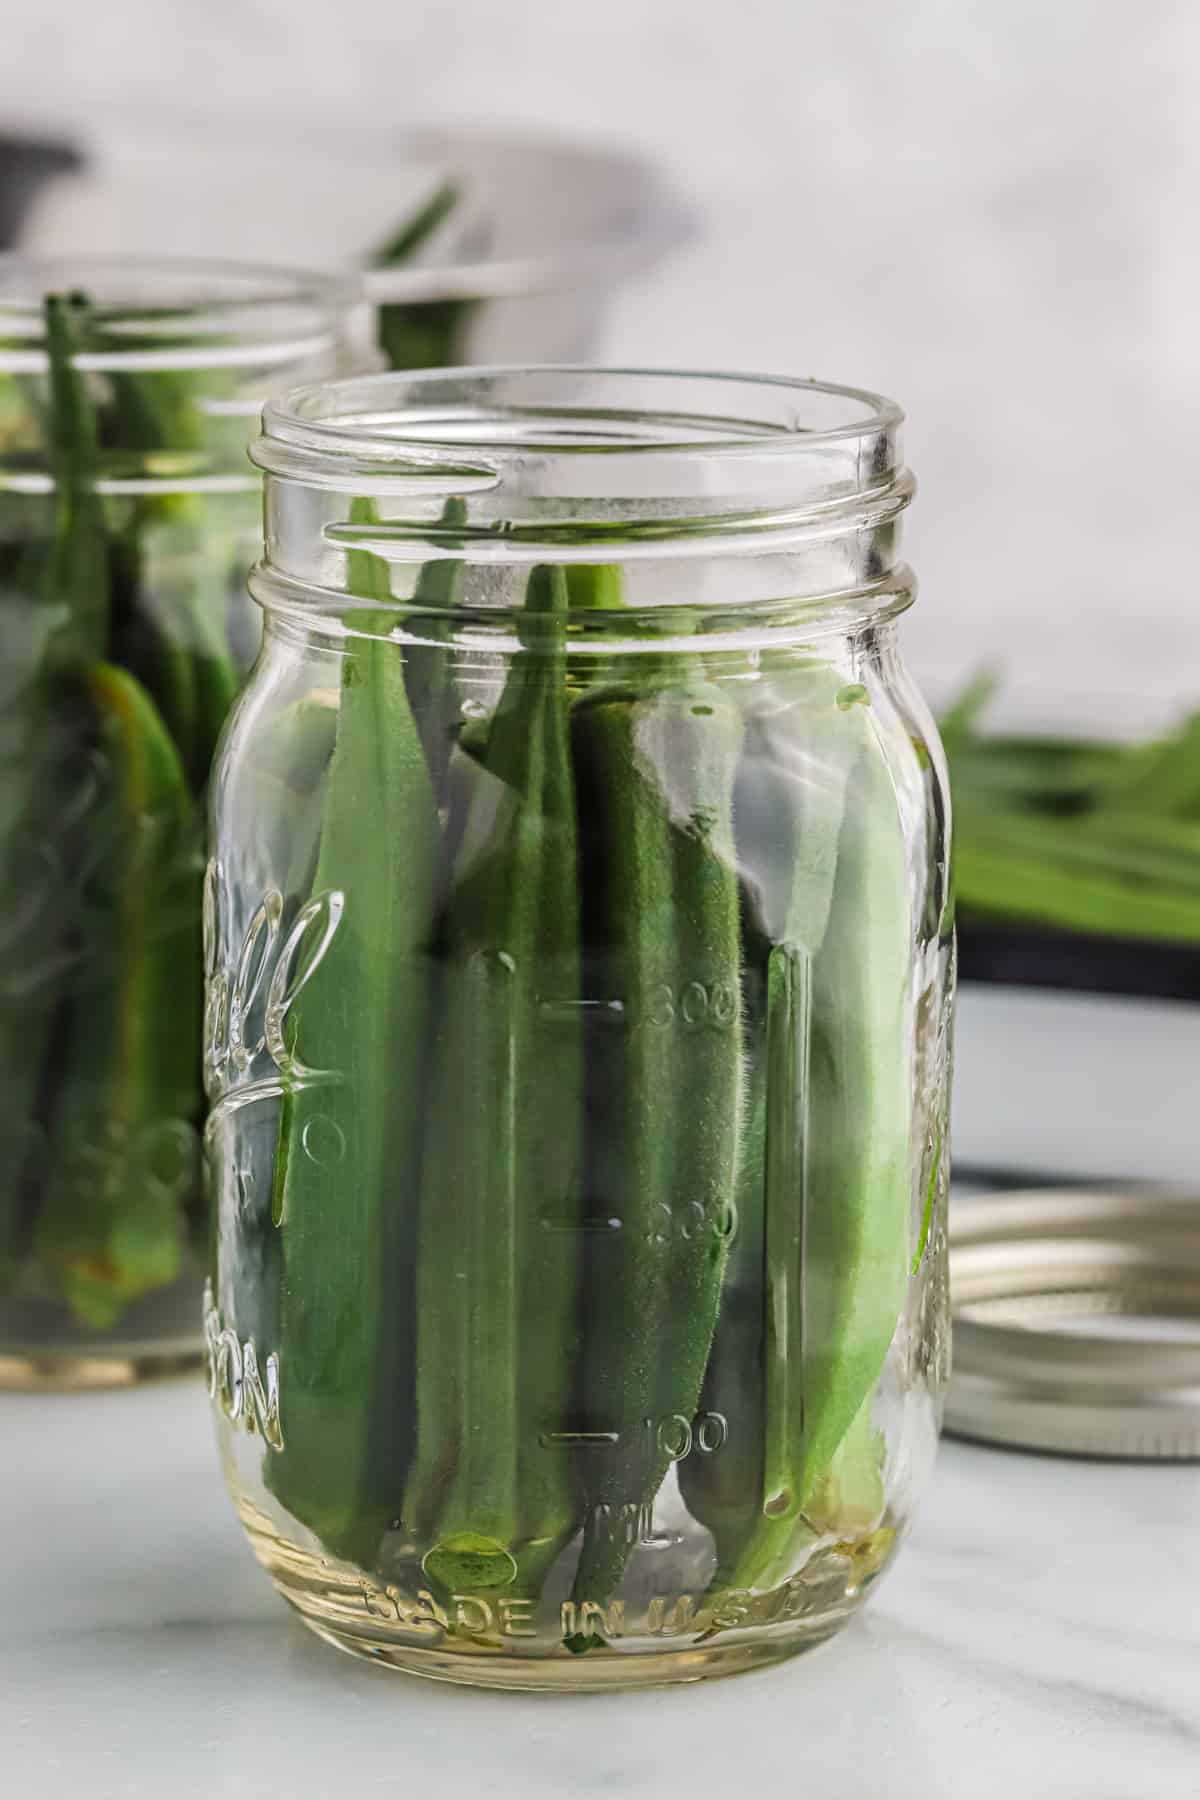 Okra packed into a jar without the spices.